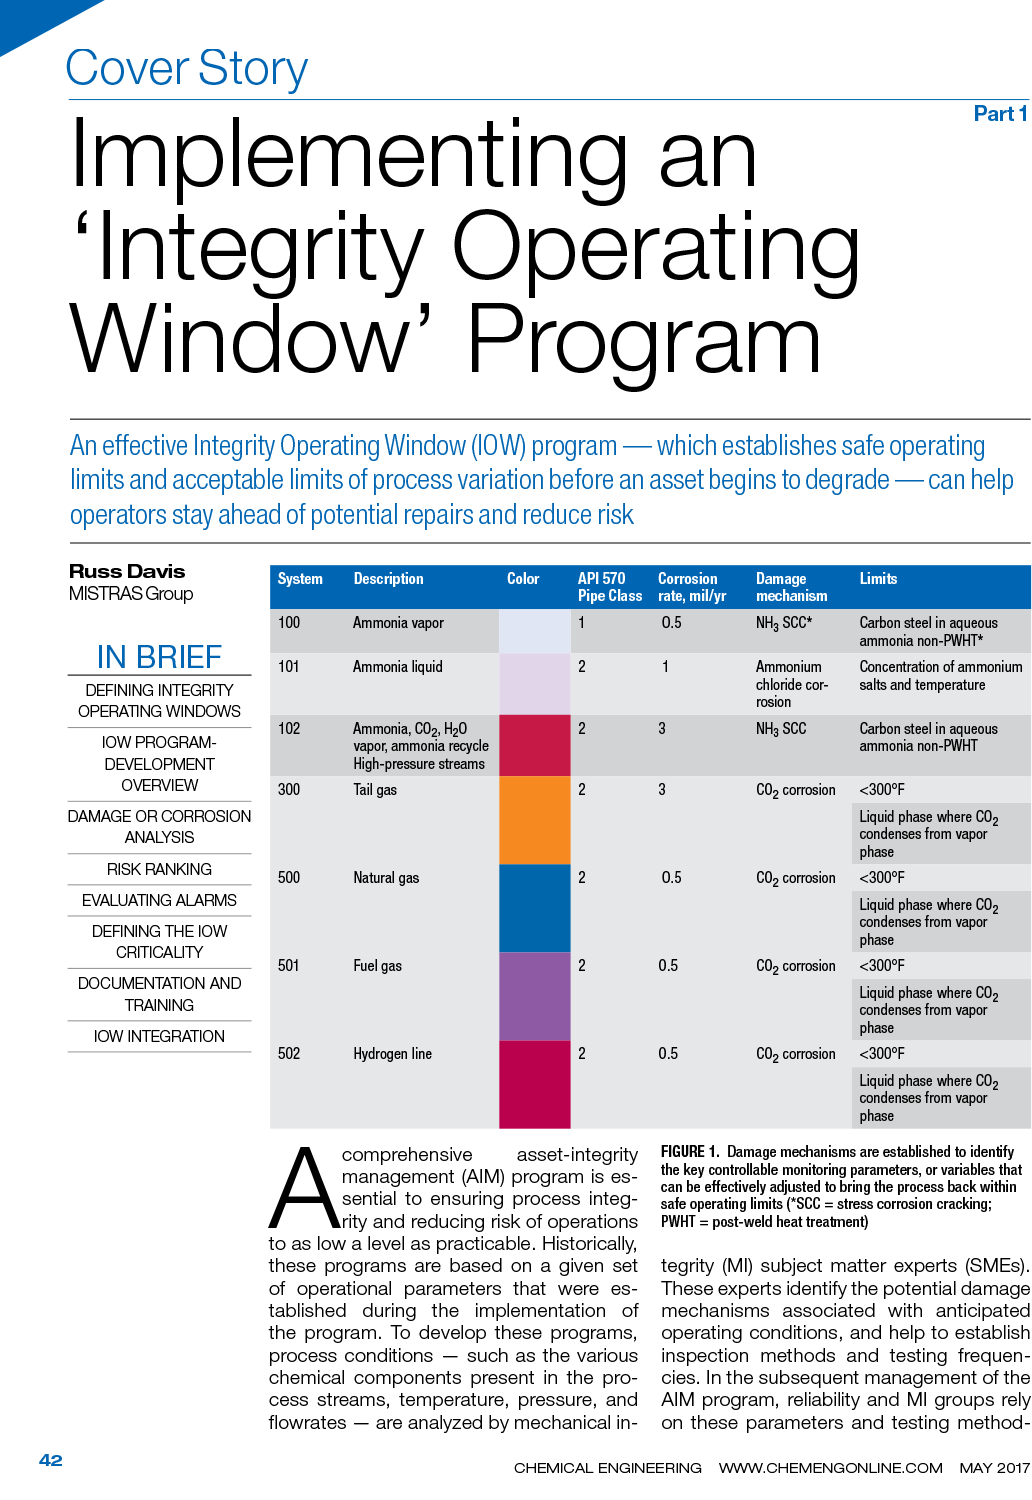 Implementing an ‘Integrity Operating Window’ Program